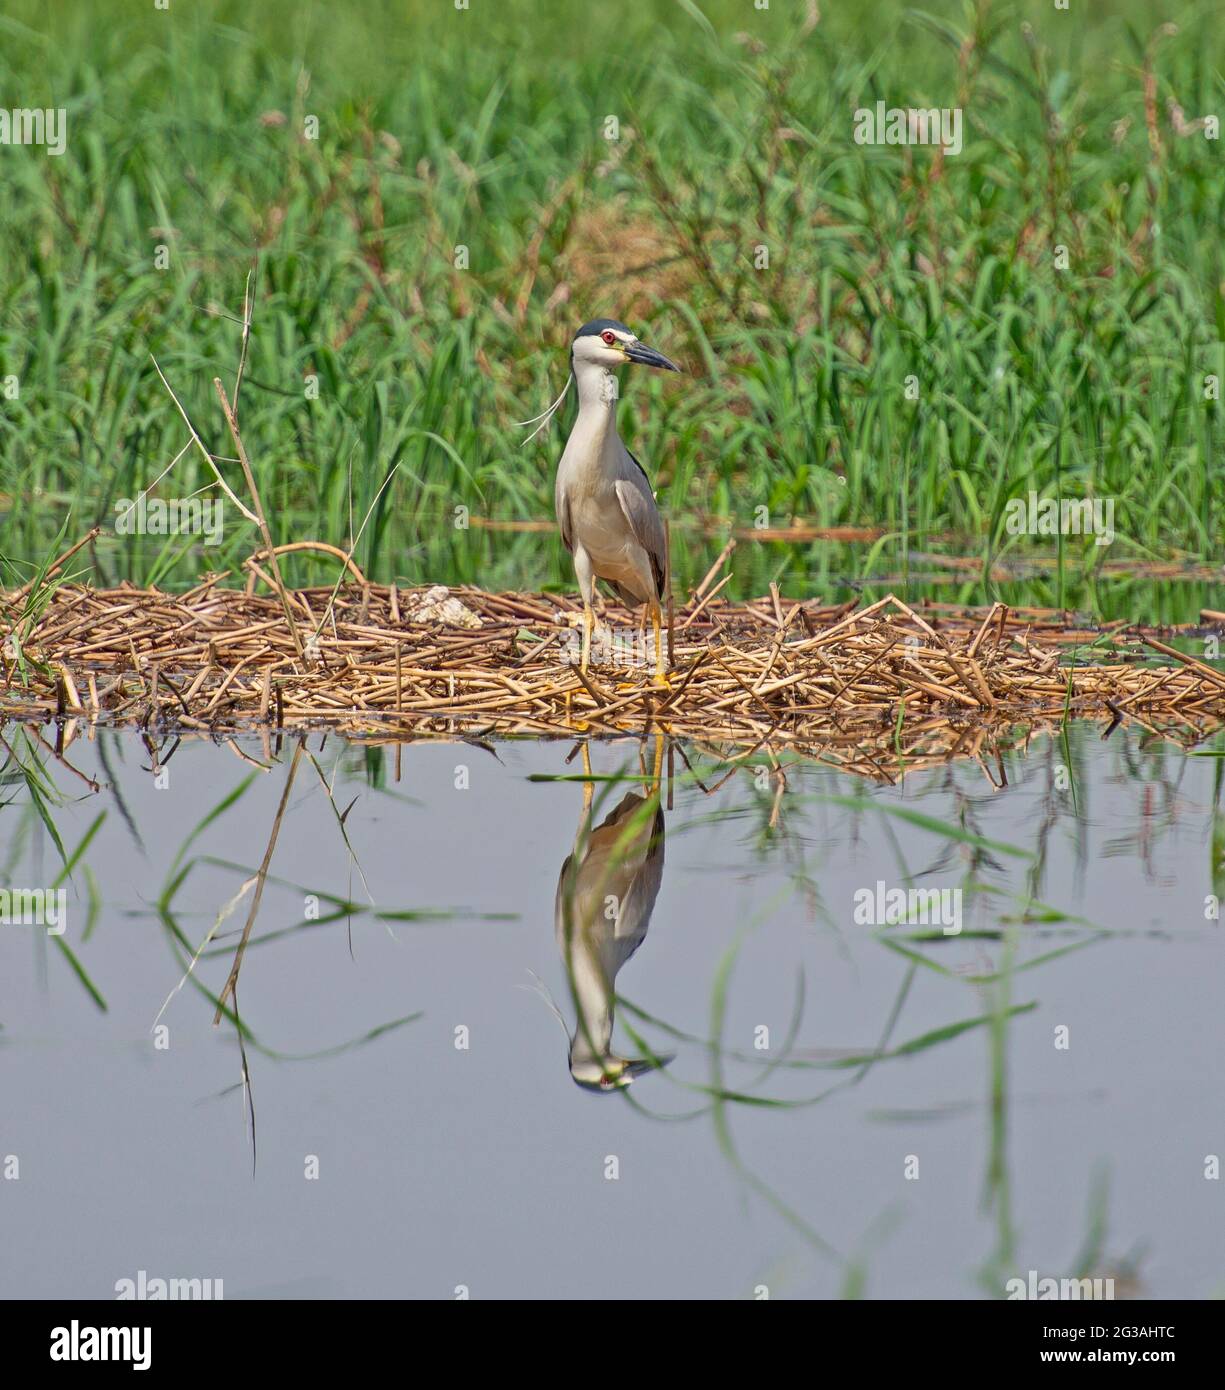 Black-crown night heron nycticorax nycticorax stood on edge of river bank wetlands in grass reeds Stock Photo